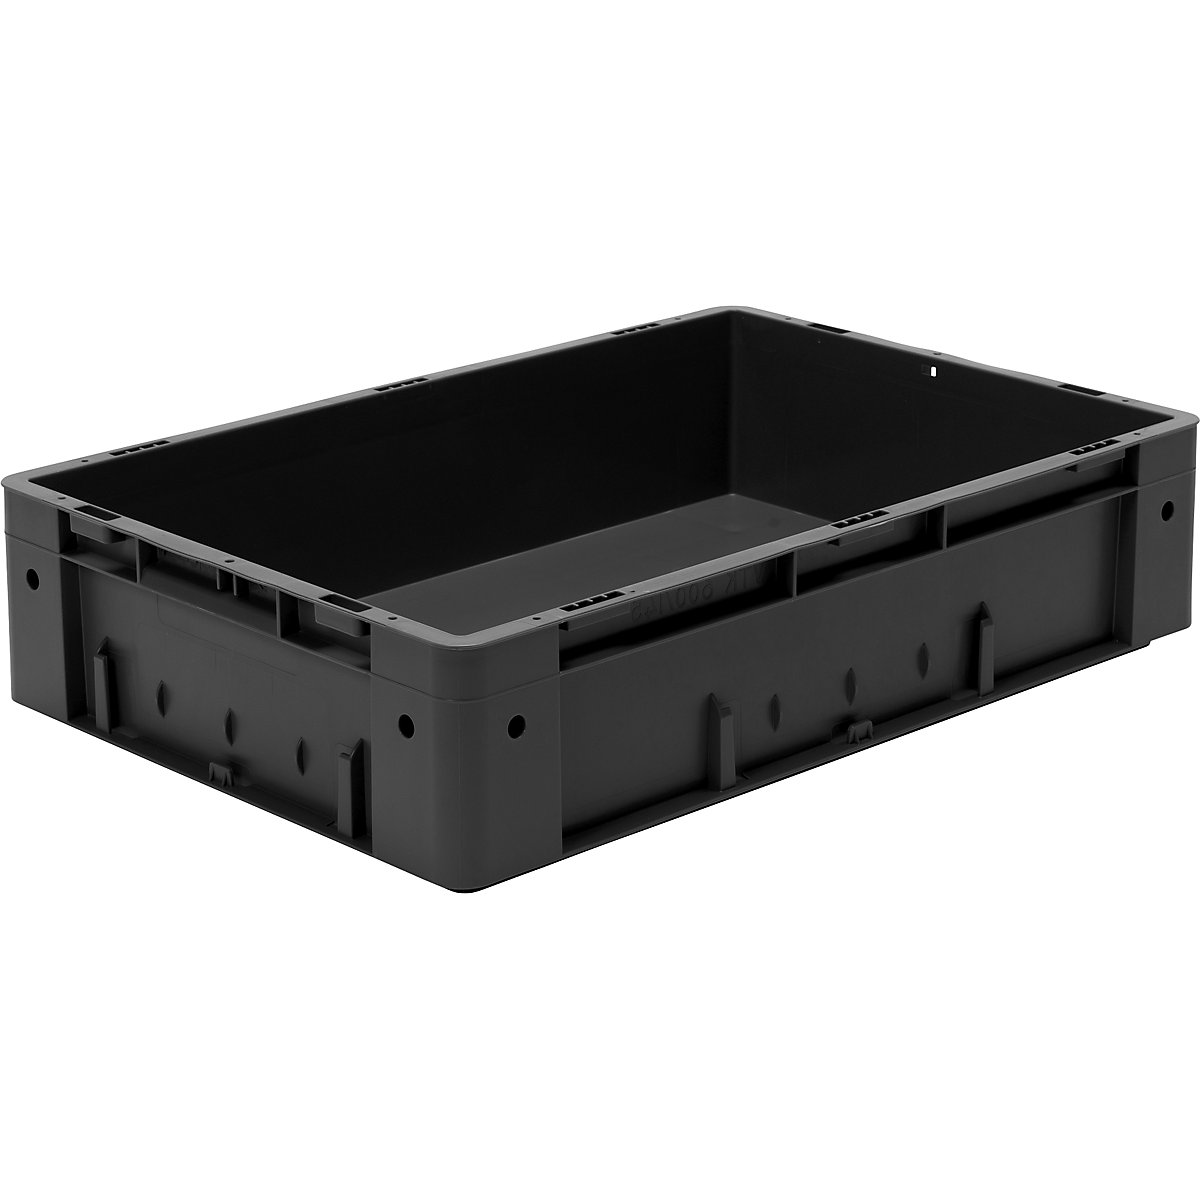 ESD heavy duty EURO-size container, made of polypropylene, LxWxH 600 x 400 x 145 mm, pack of 2-8